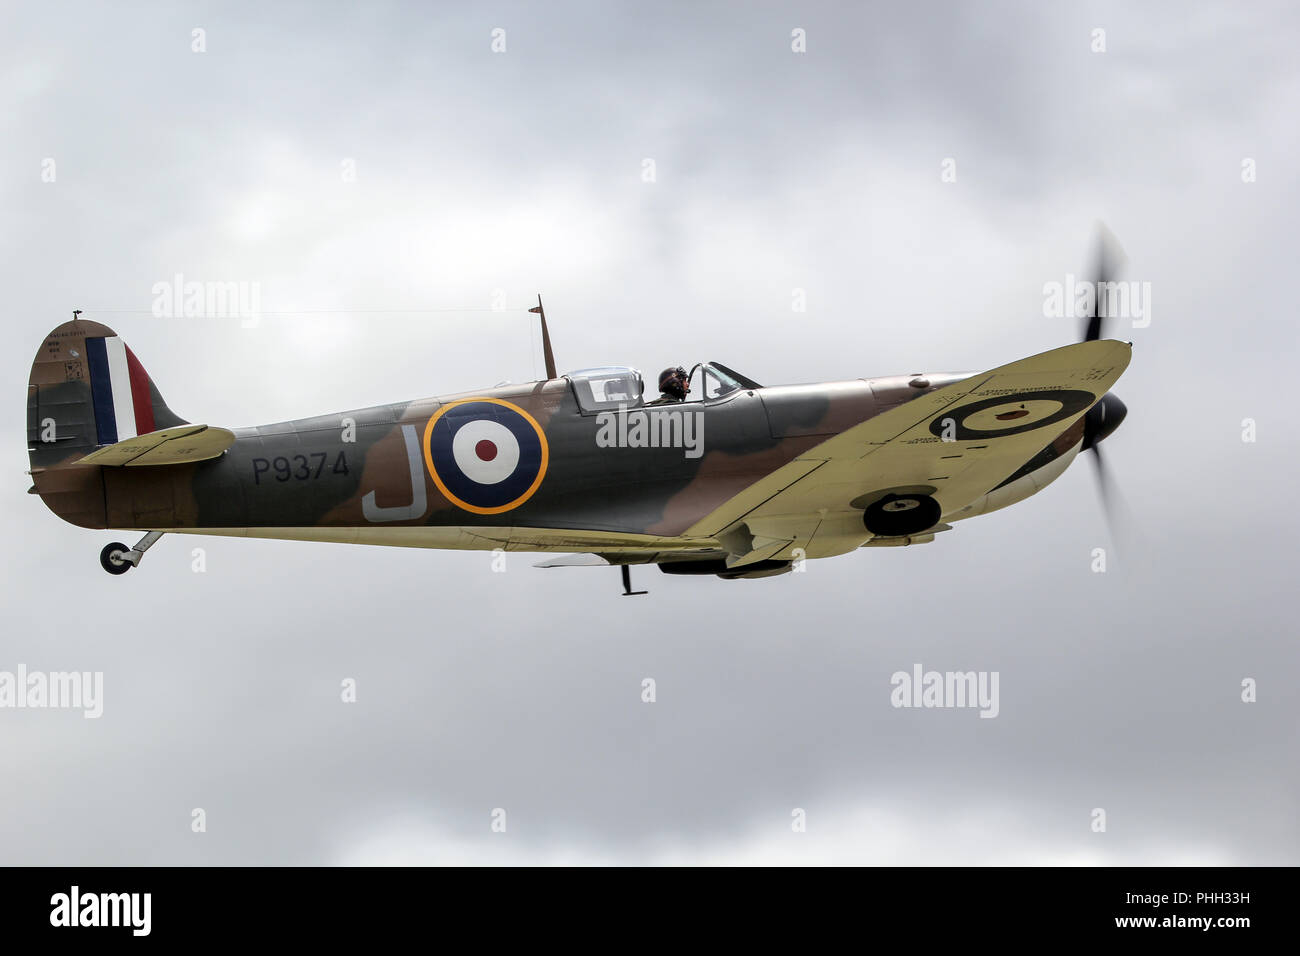 A Spitfire takes off from Duxford, with the landing gear having almost completed raising. Stock Photo